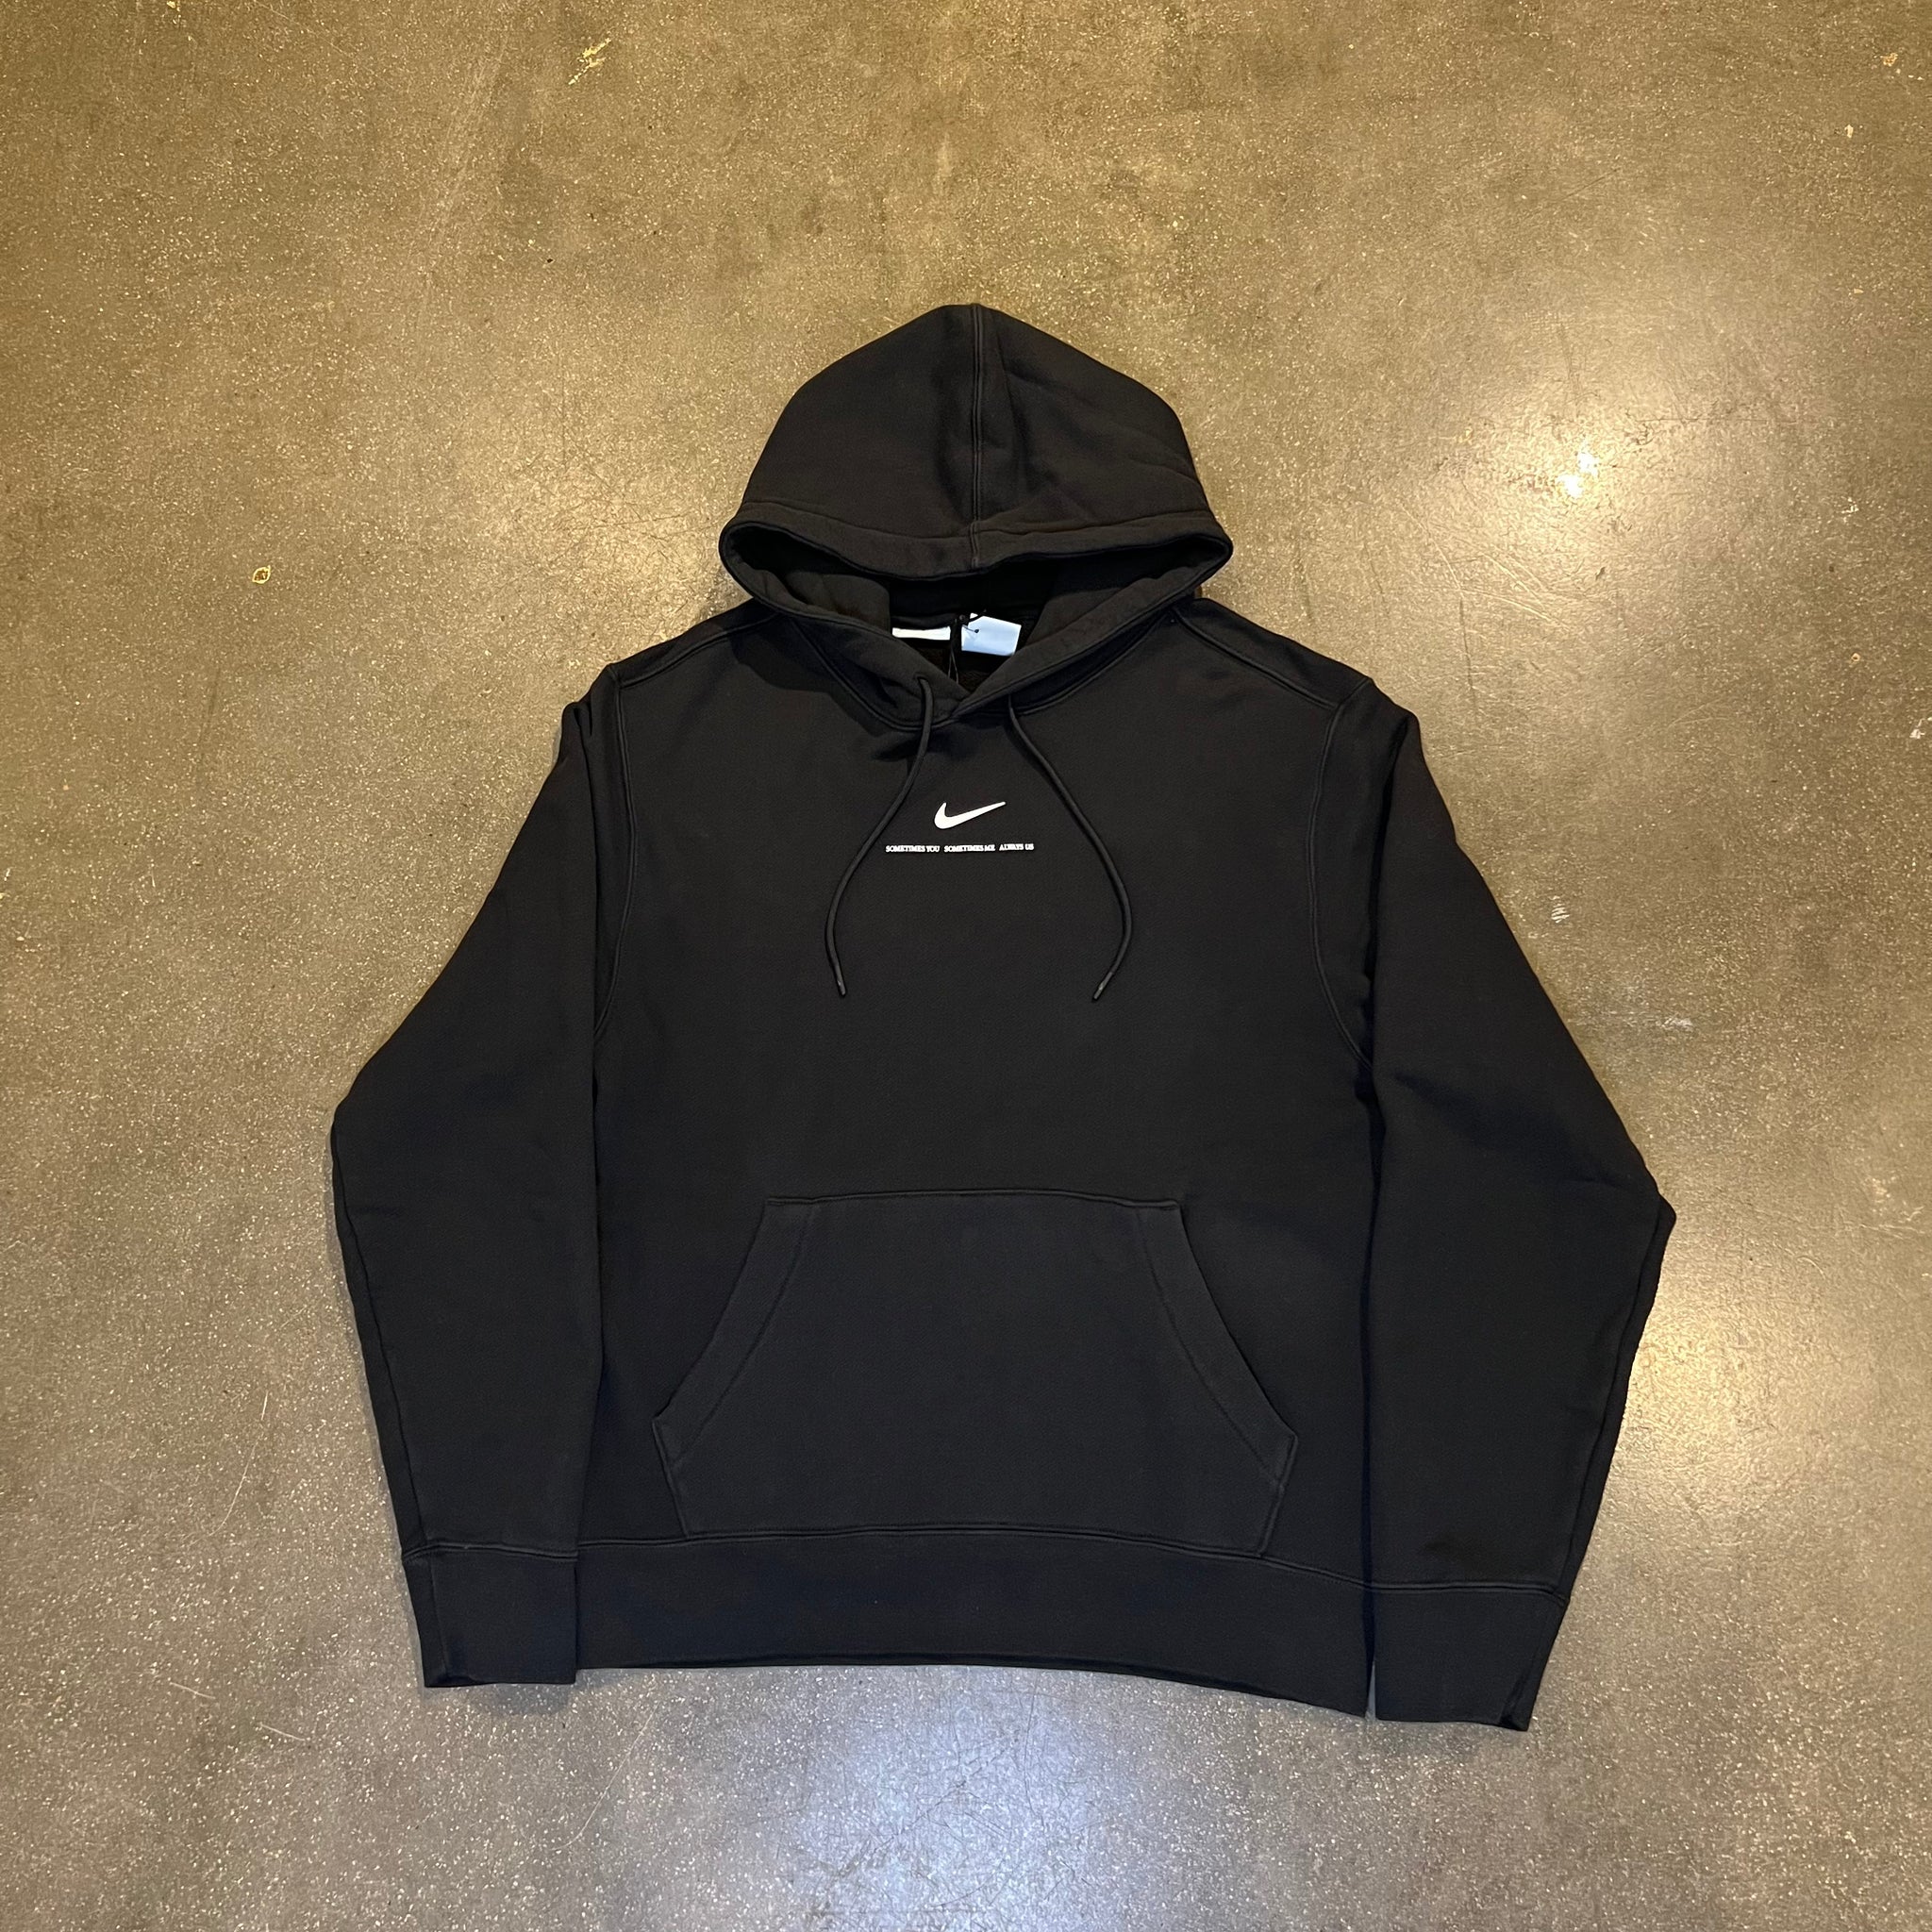 Nike x NOCTA Basketball Hoodie Black – FABULOUS CONSIGNMENT STORE